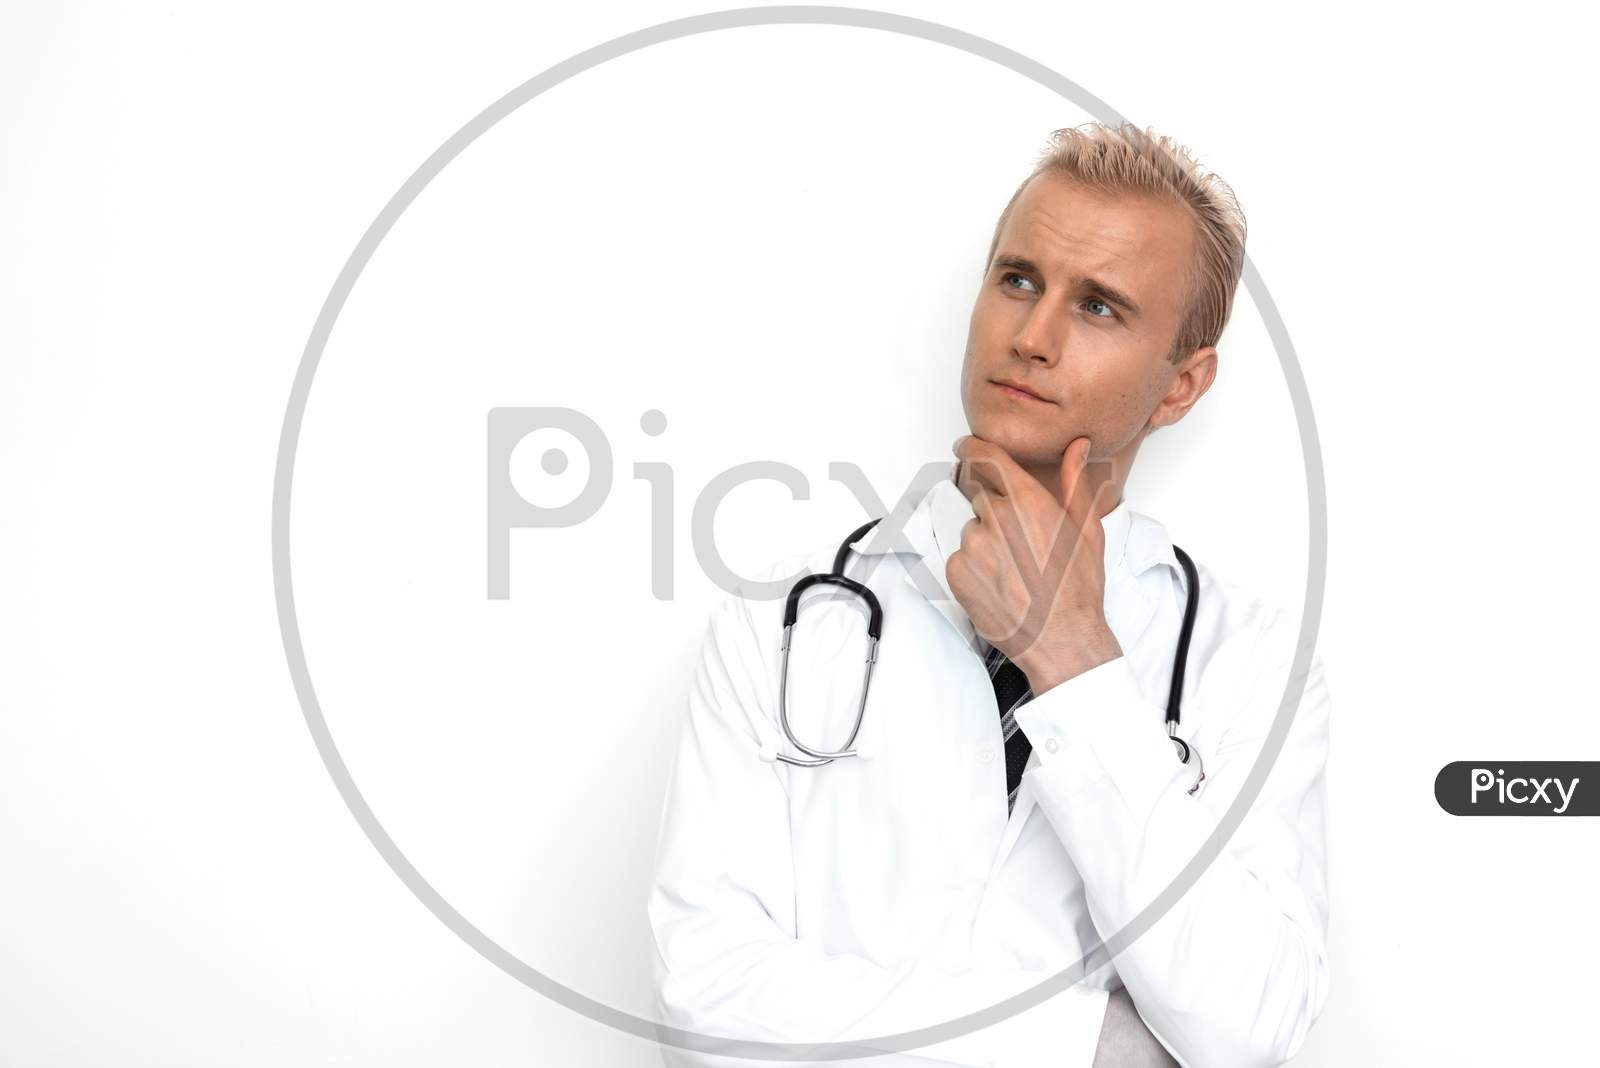 Doctor With Stethoscope Thinking And Imagine On The White Background. Medical And Healthcare Concept. Hospital Theme